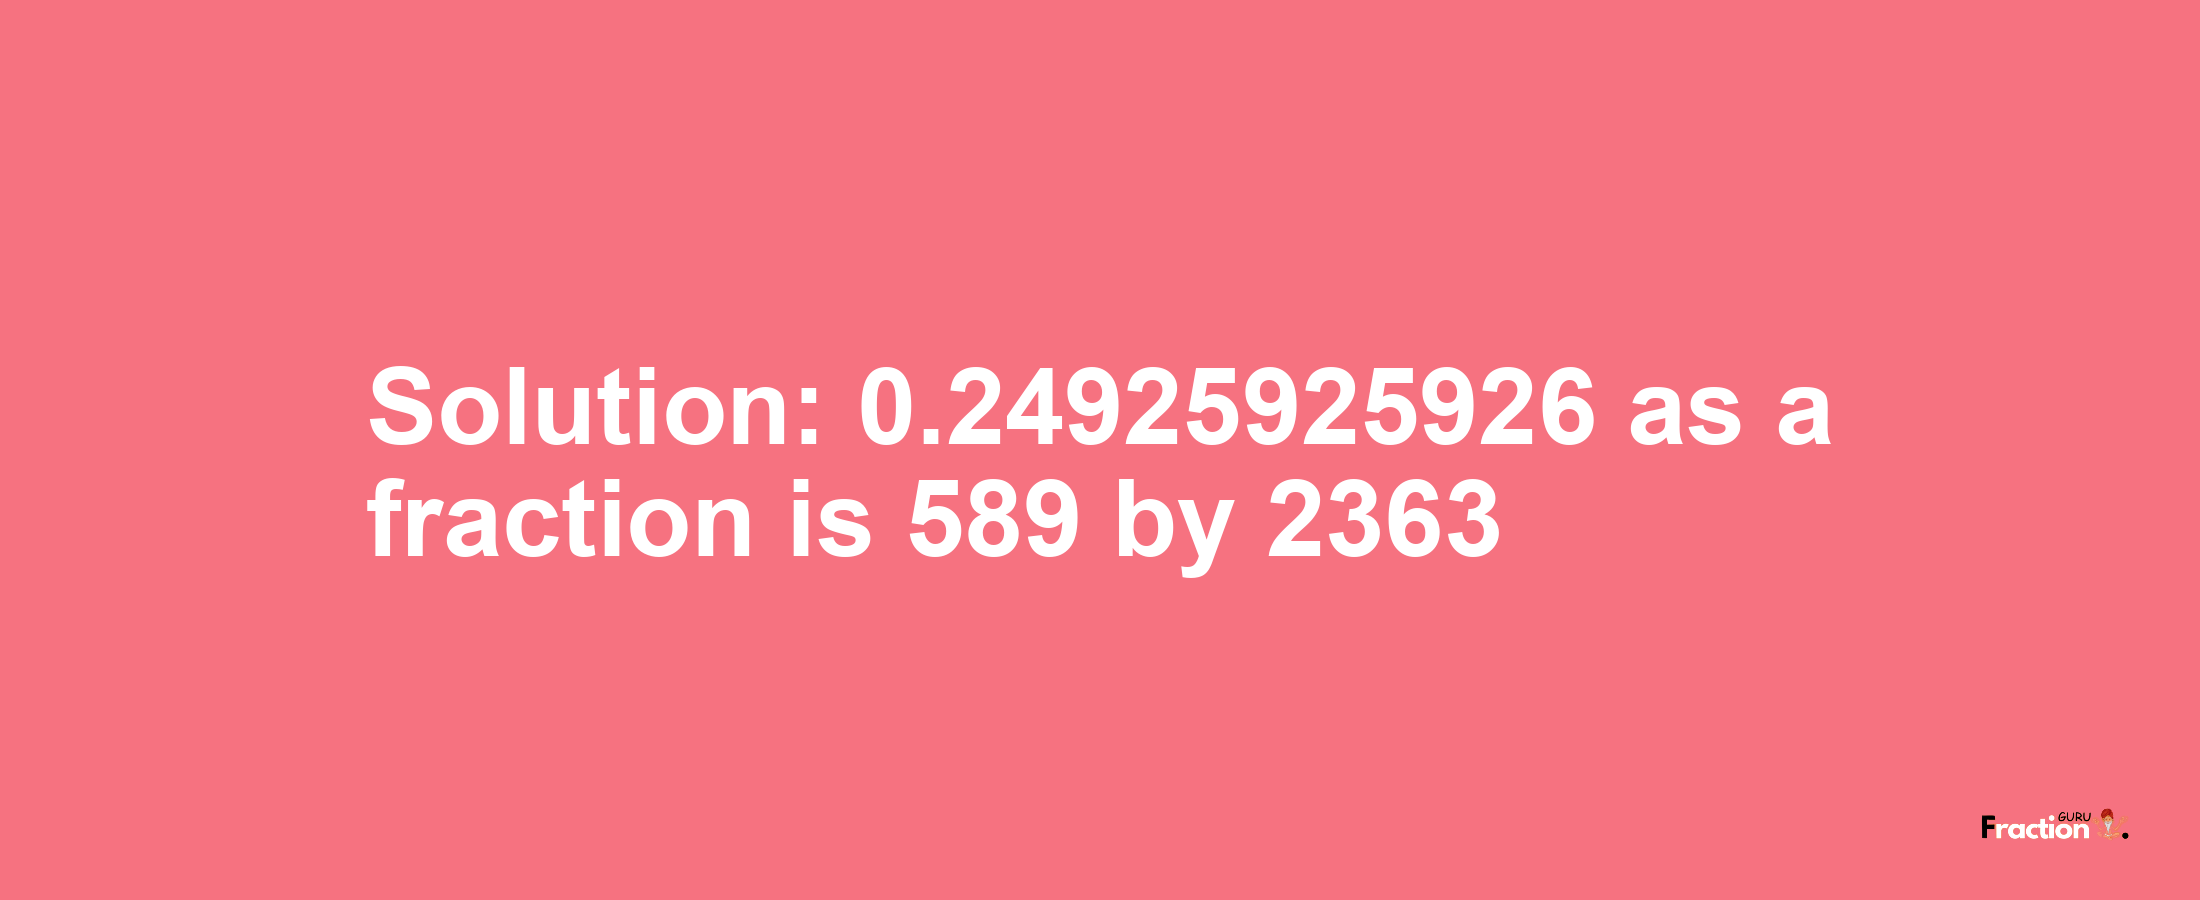 Solution:0.24925925926 as a fraction is 589/2363